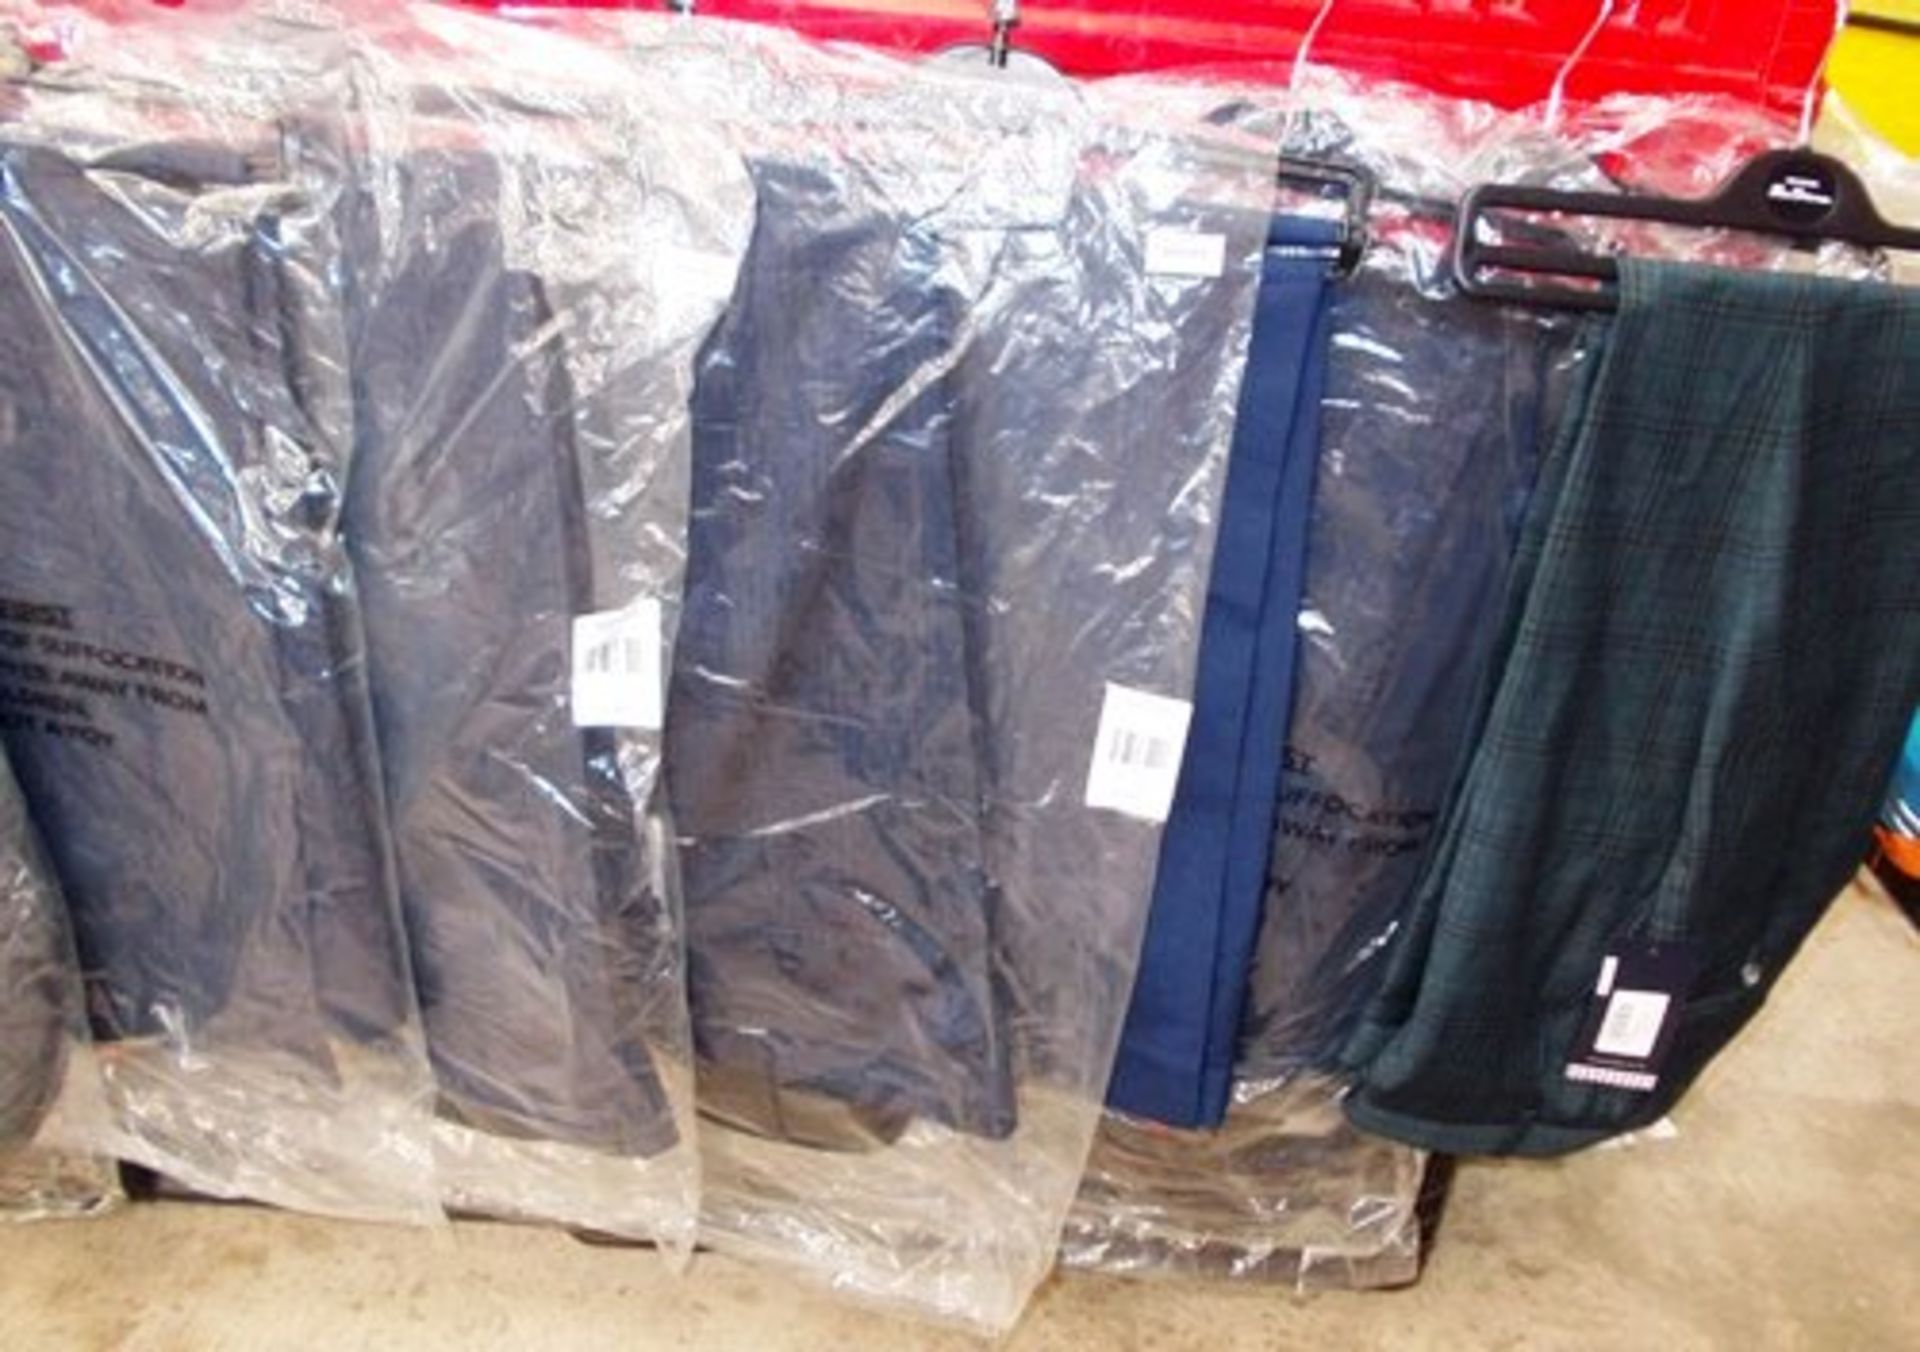 12 x pairs of men's trousers including 5 x pairs of Moss stretch trousers, size 32 - 36, Ben - Image 2 of 2